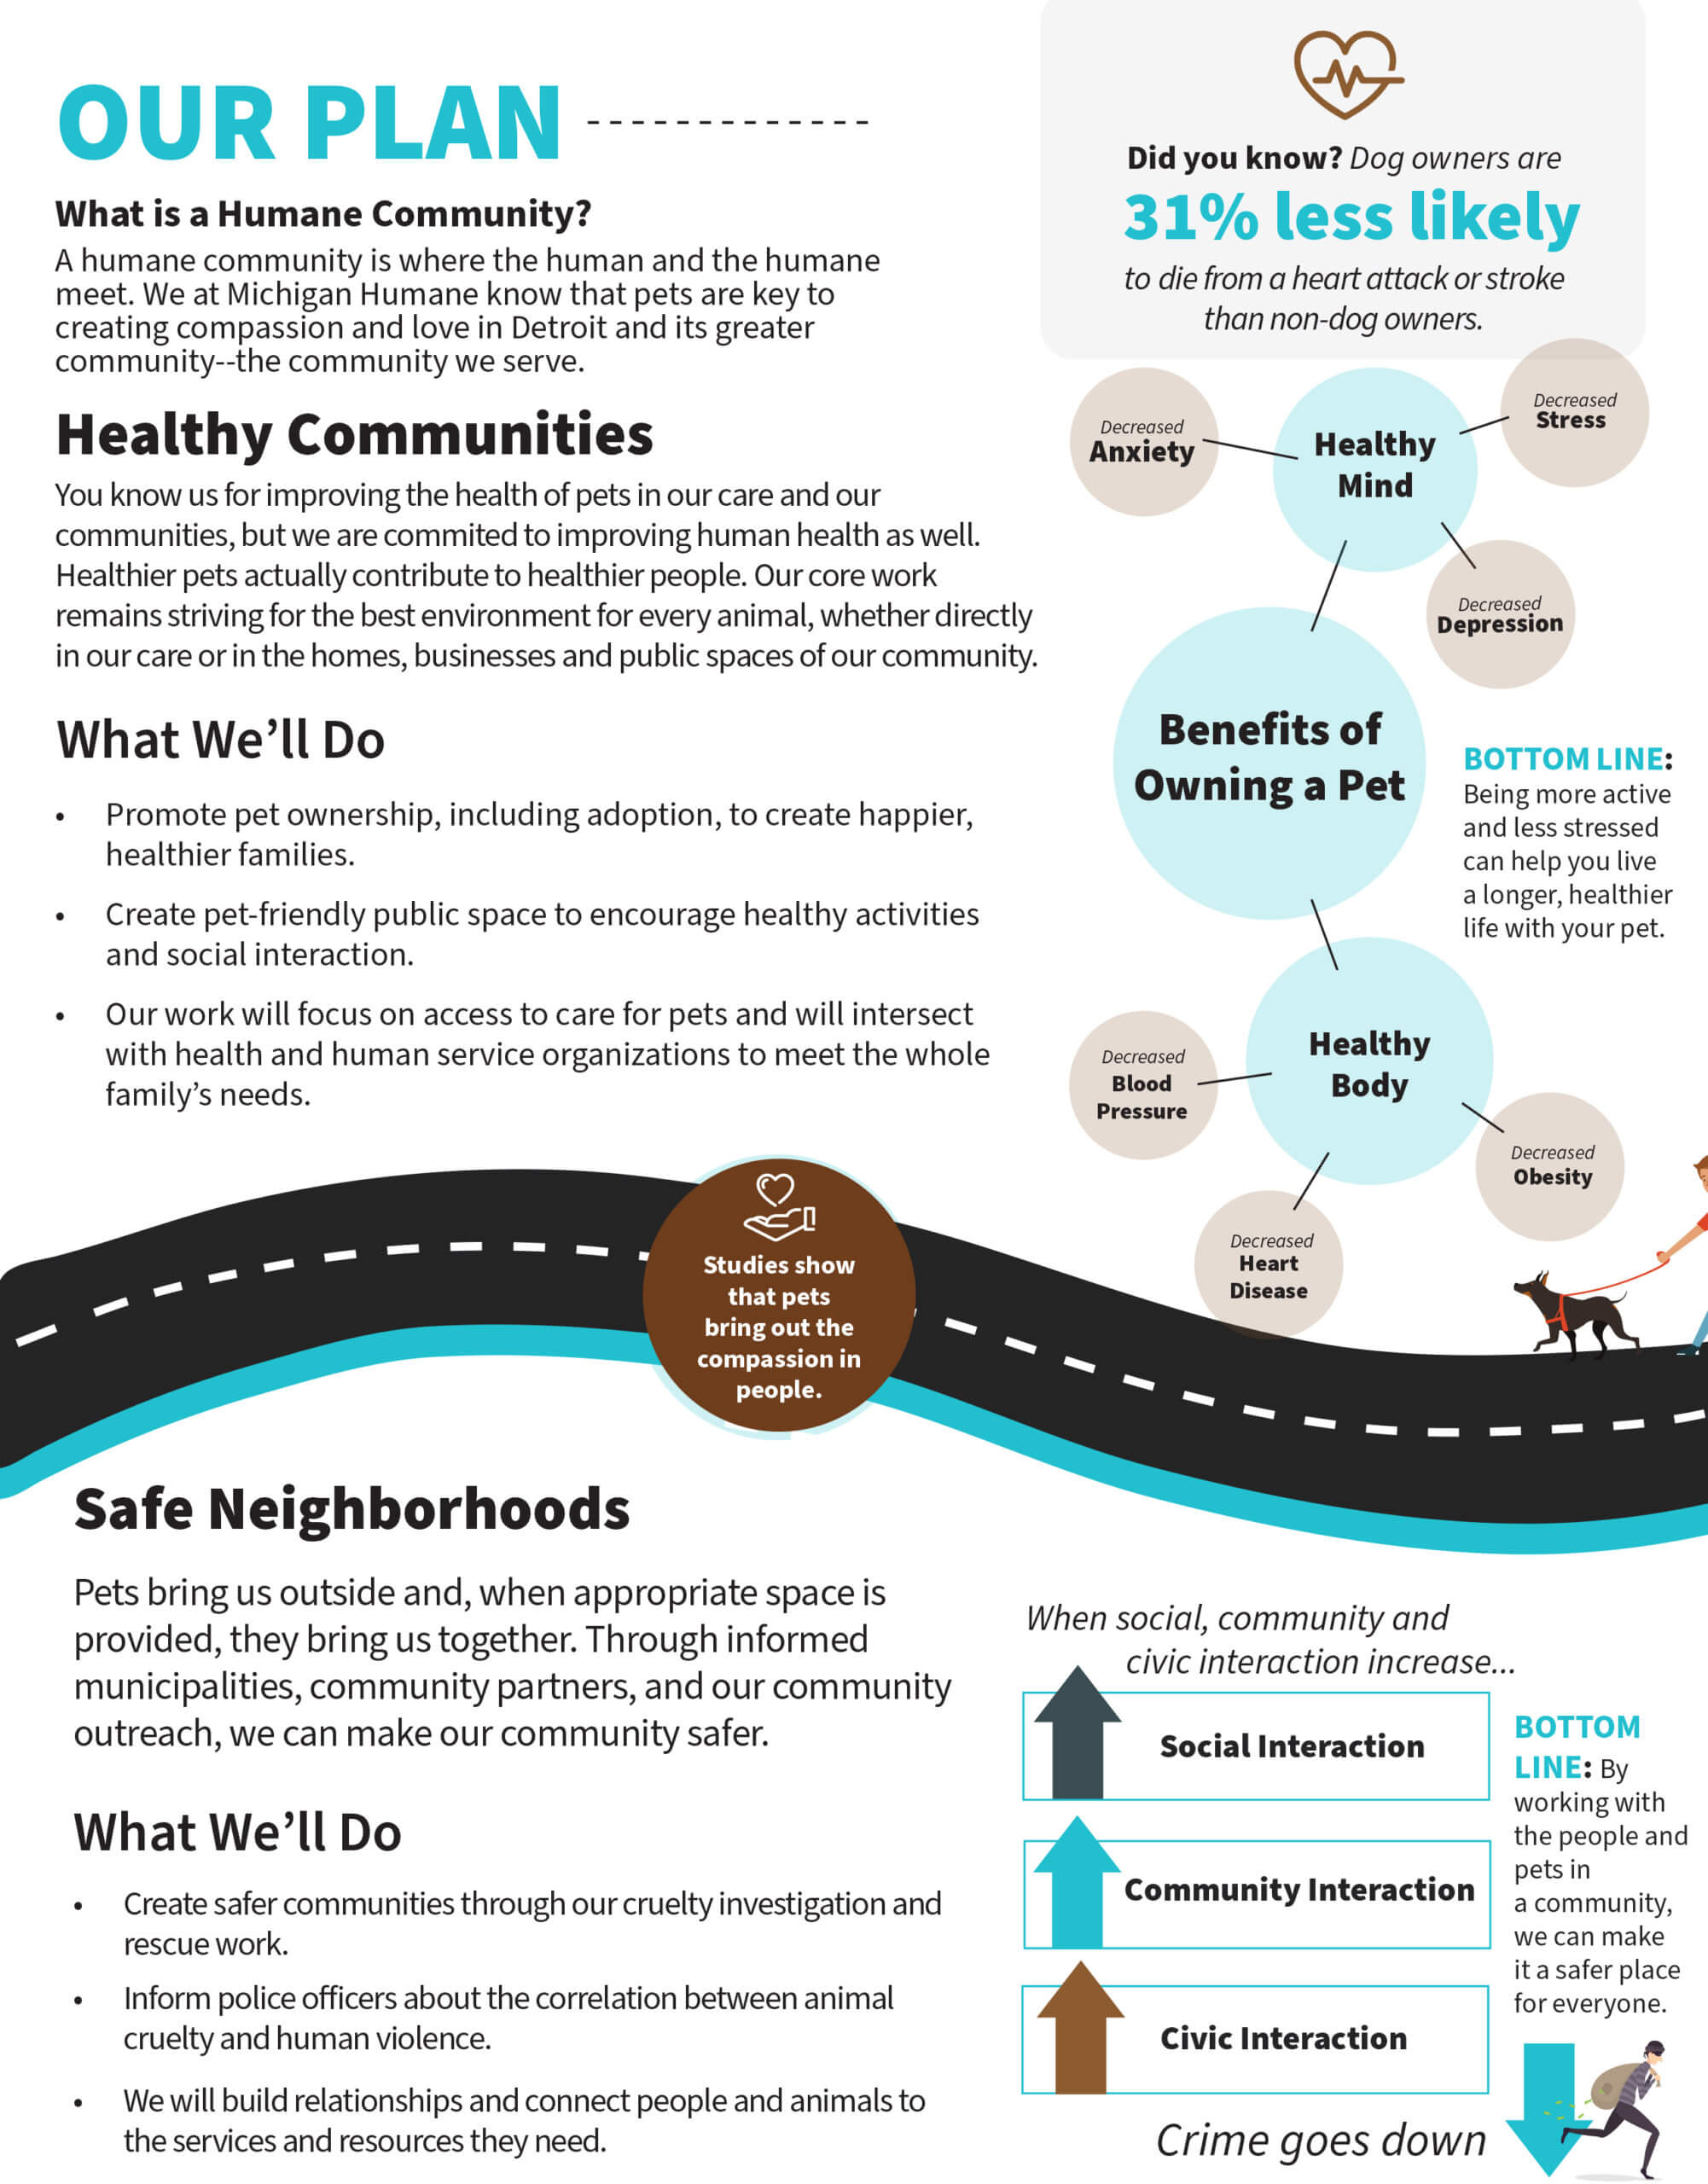 Our Plan For Humane Communities